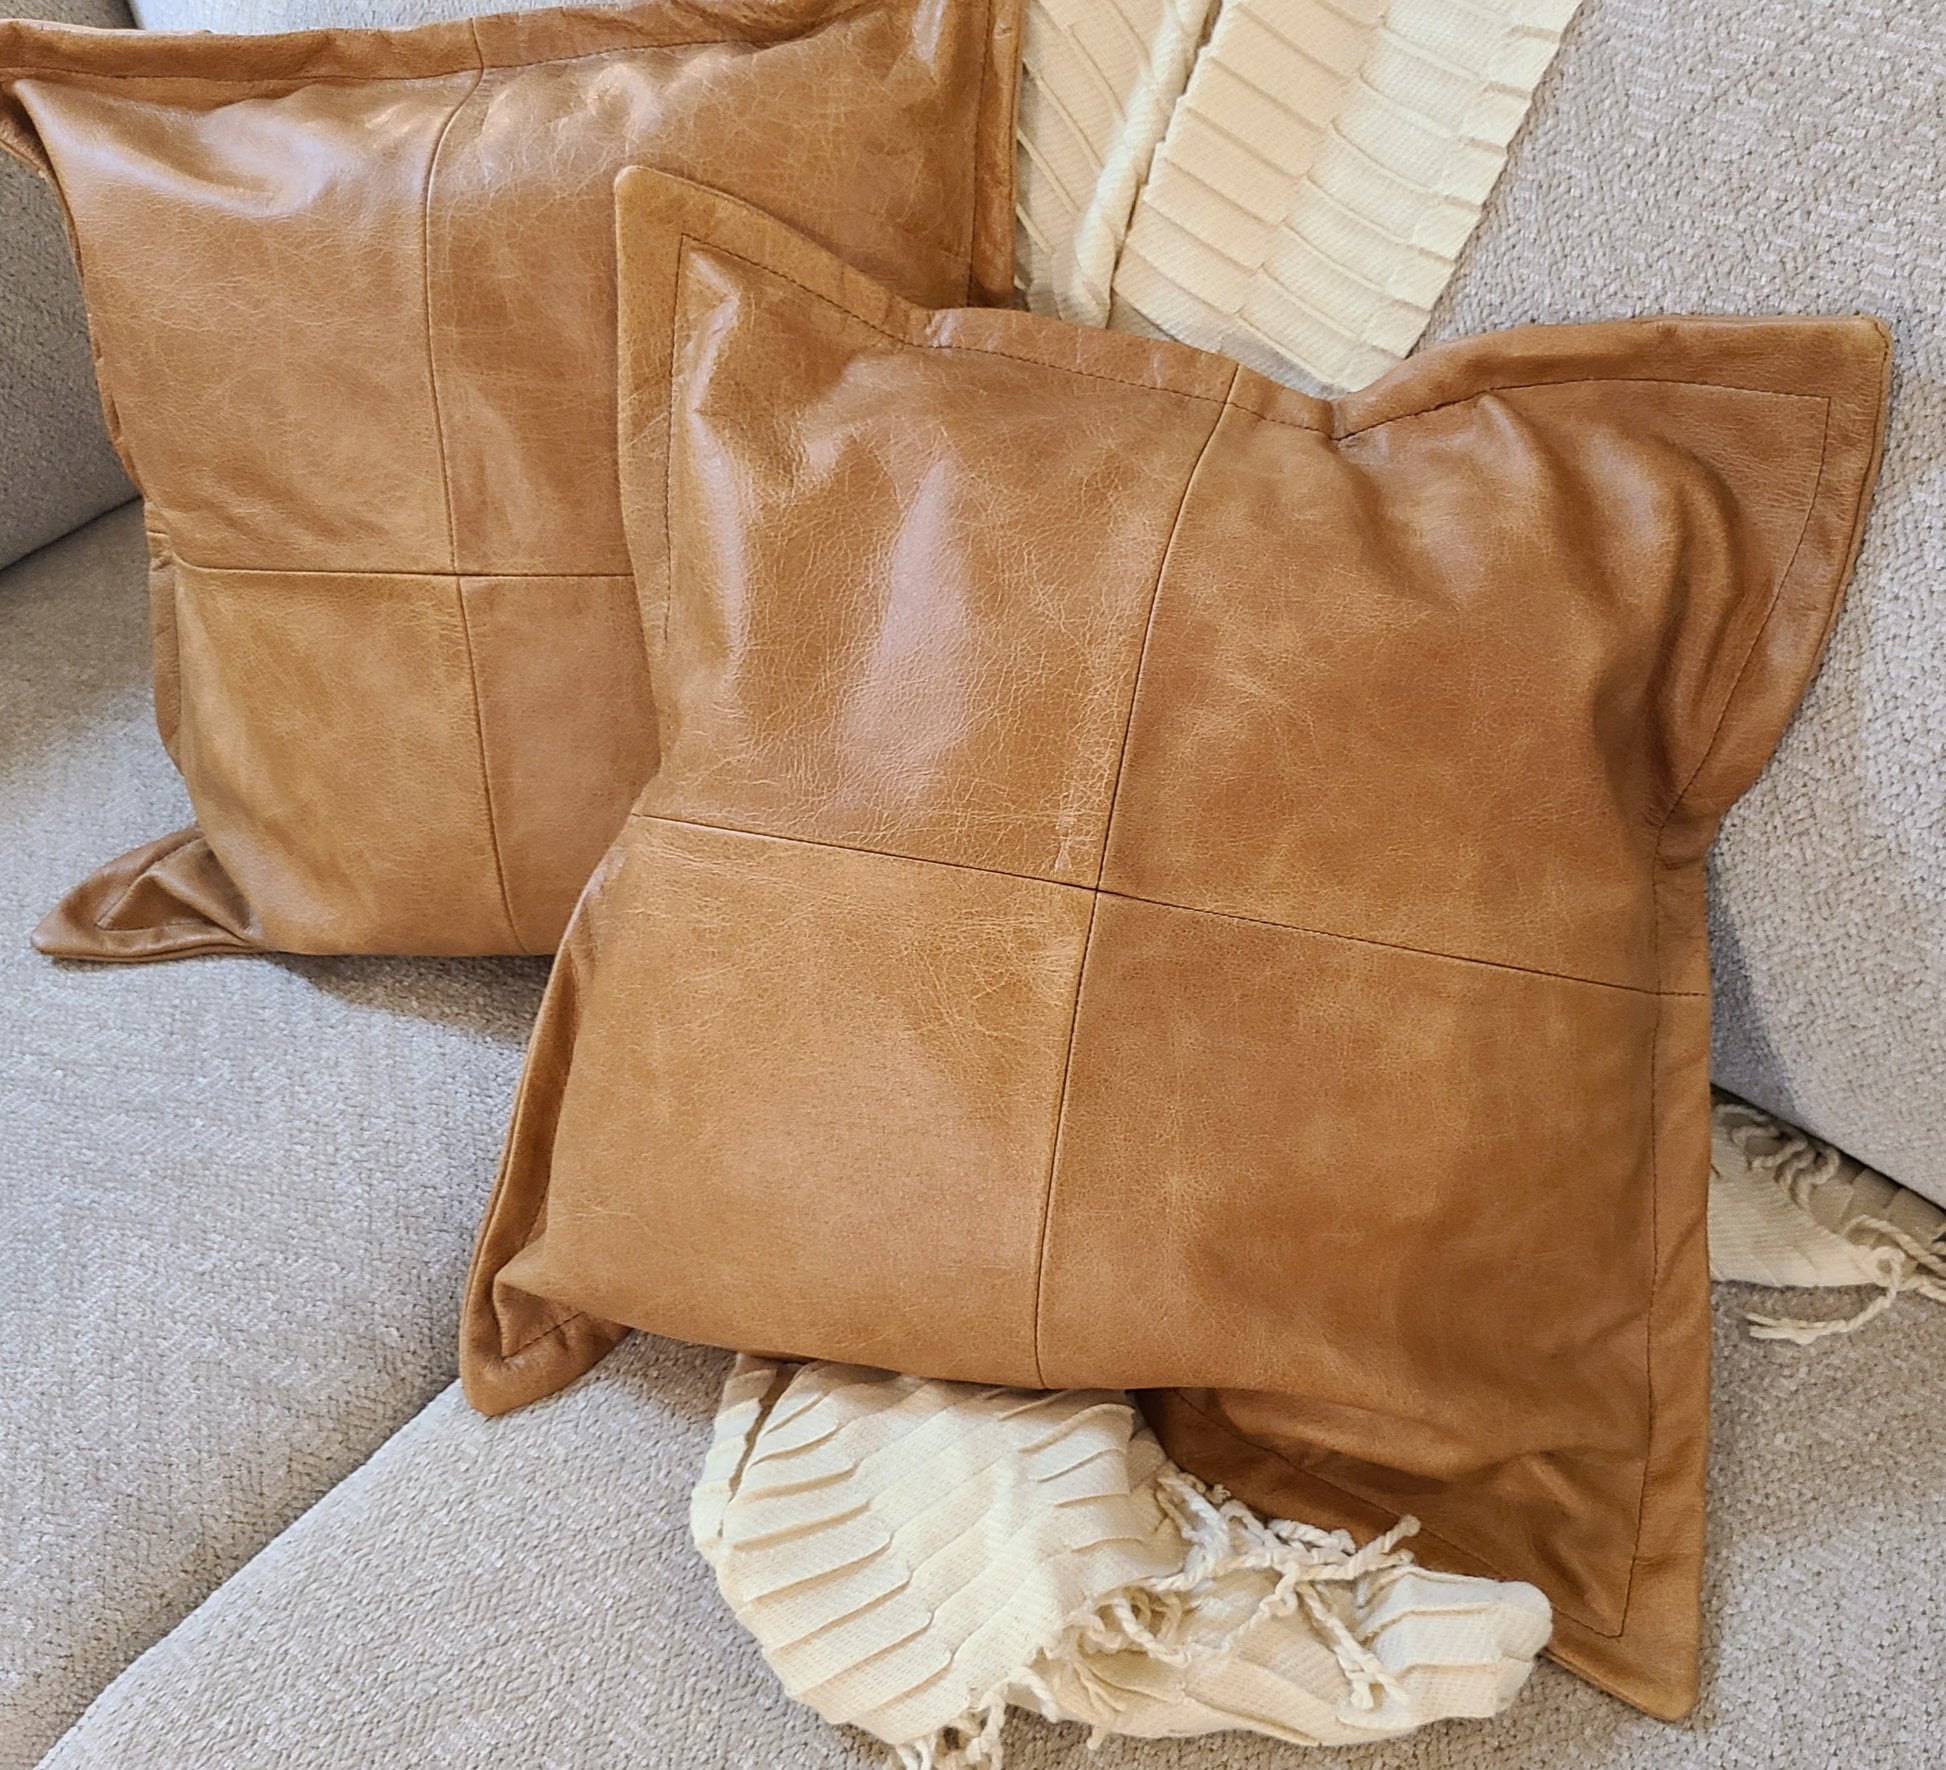 100% Lambskin Leather Caramel Brown Throw Pillow Cover - 18 x 18-Status Co. Leather Studio